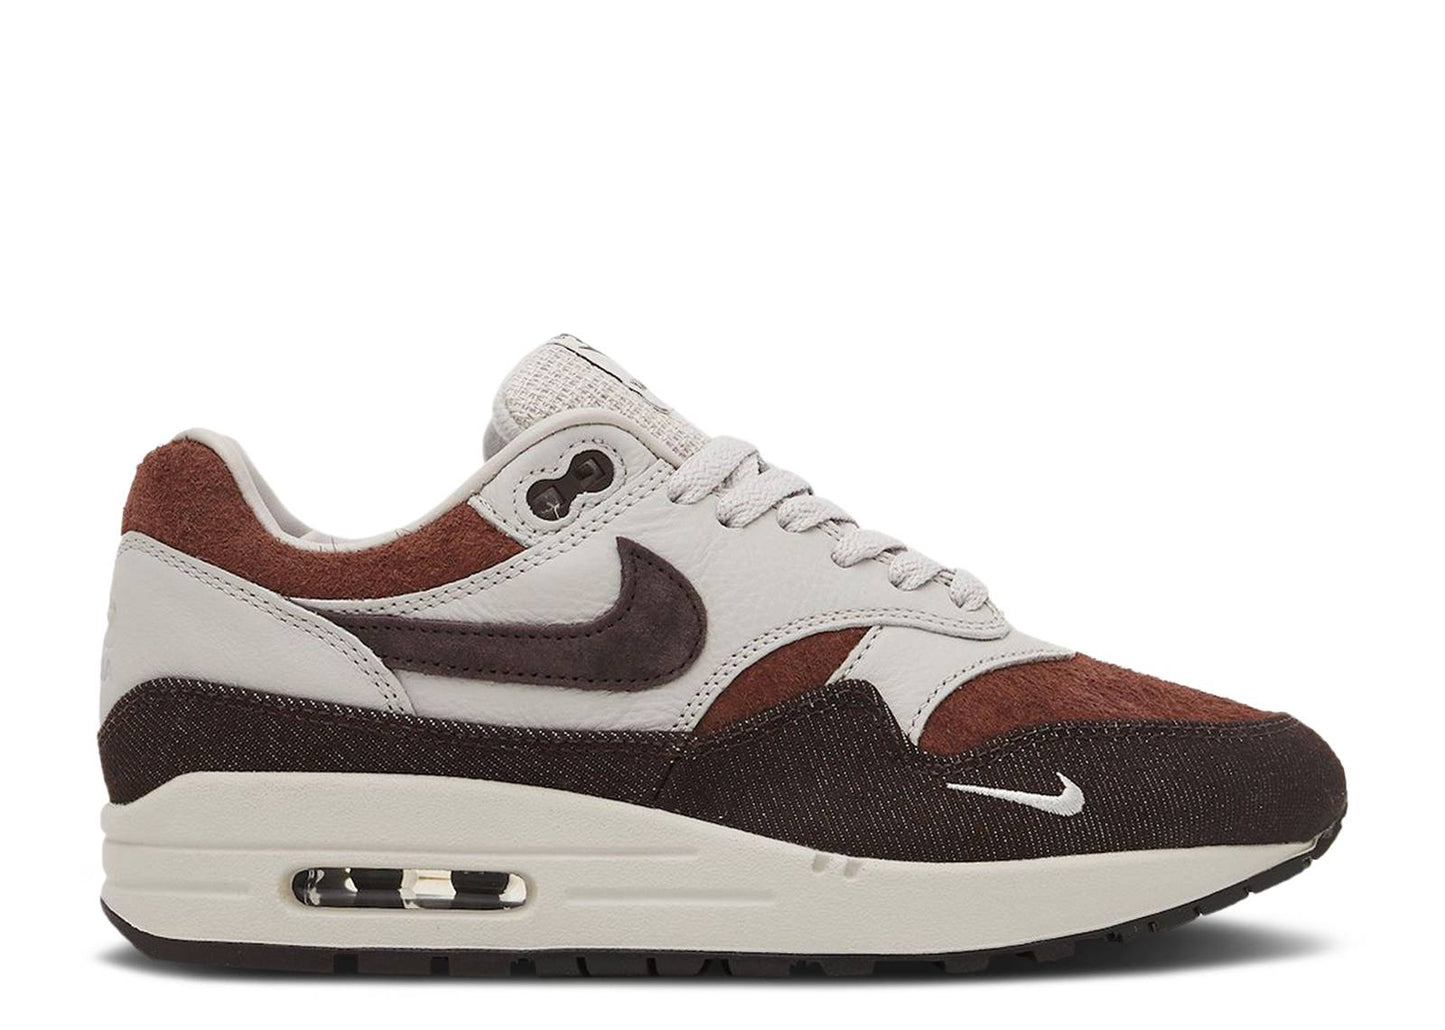 Nike Air Max 1 x Size? 'Considered'